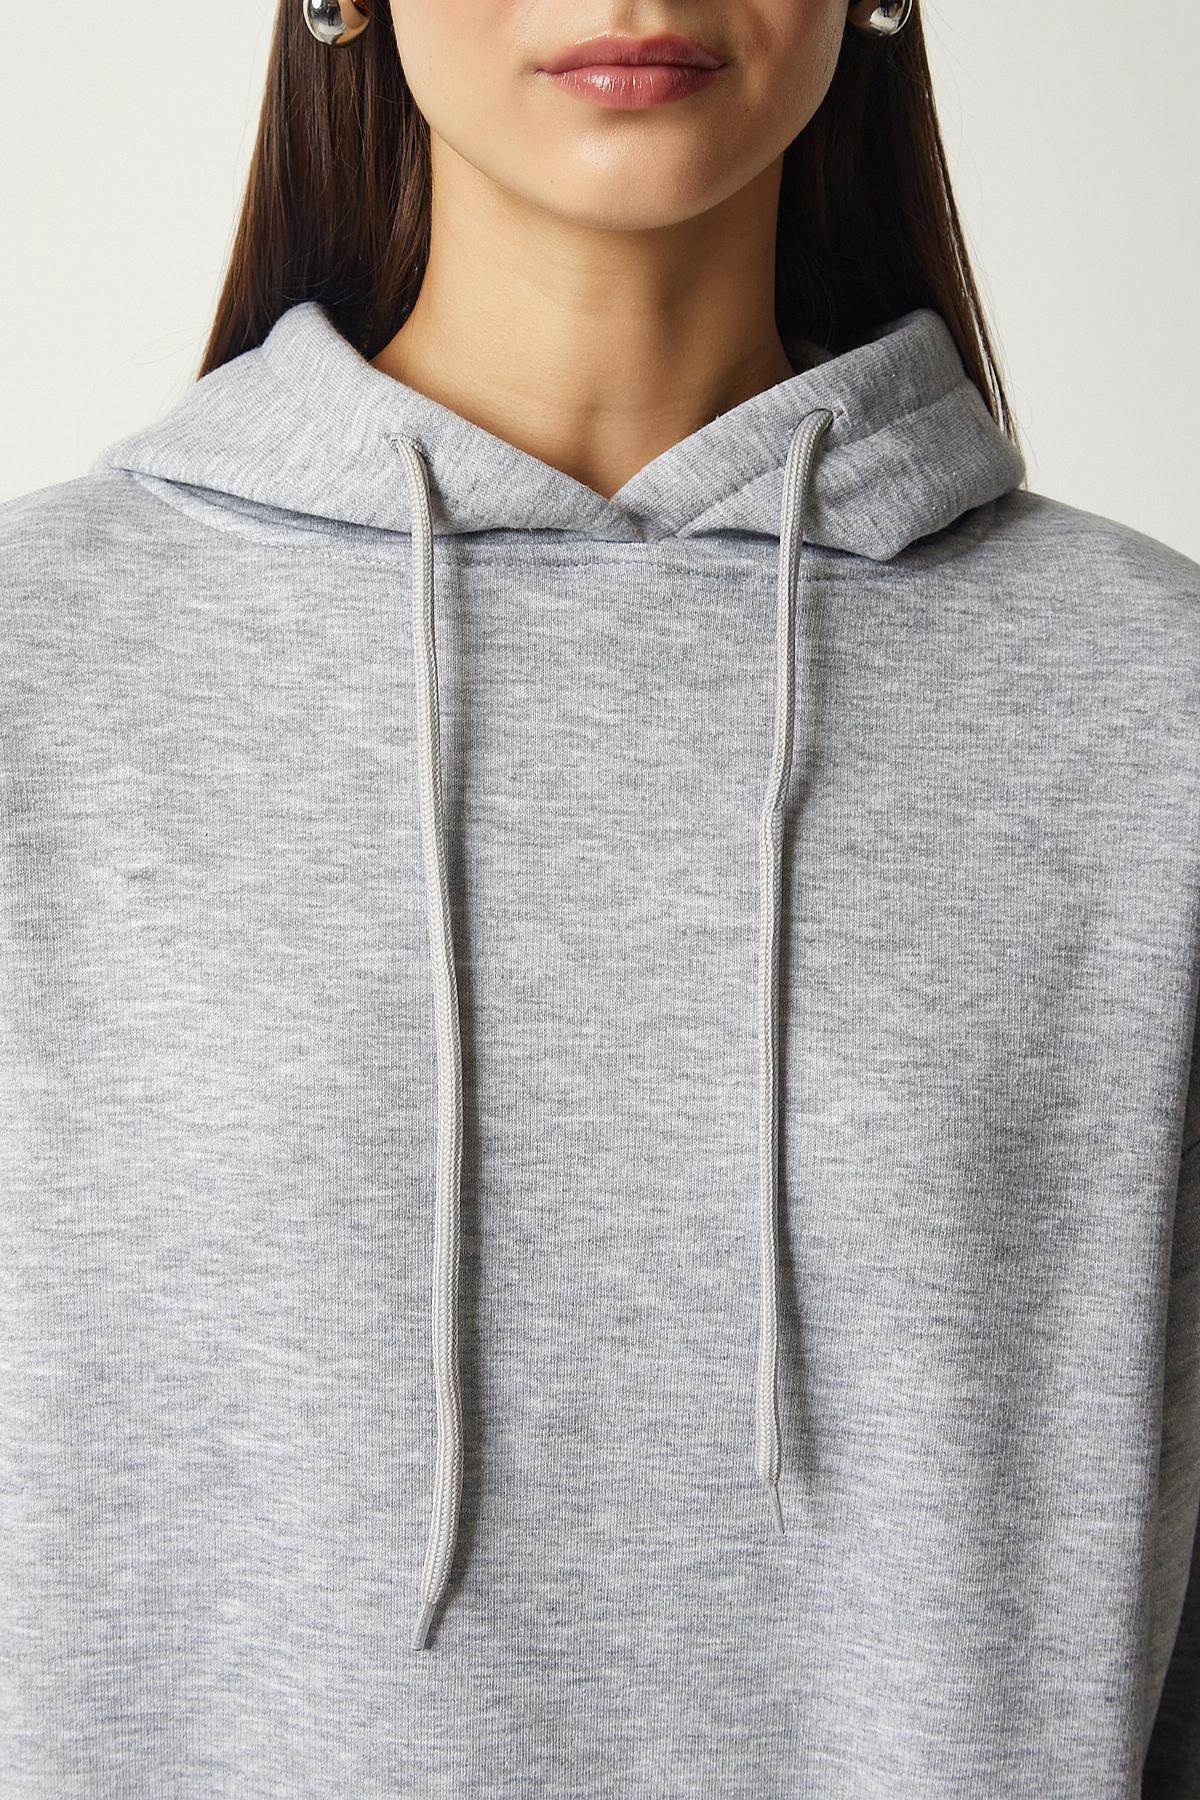 Happiness Istanbul - Grey Hooded Knitted Tracksuit, Set Of 2